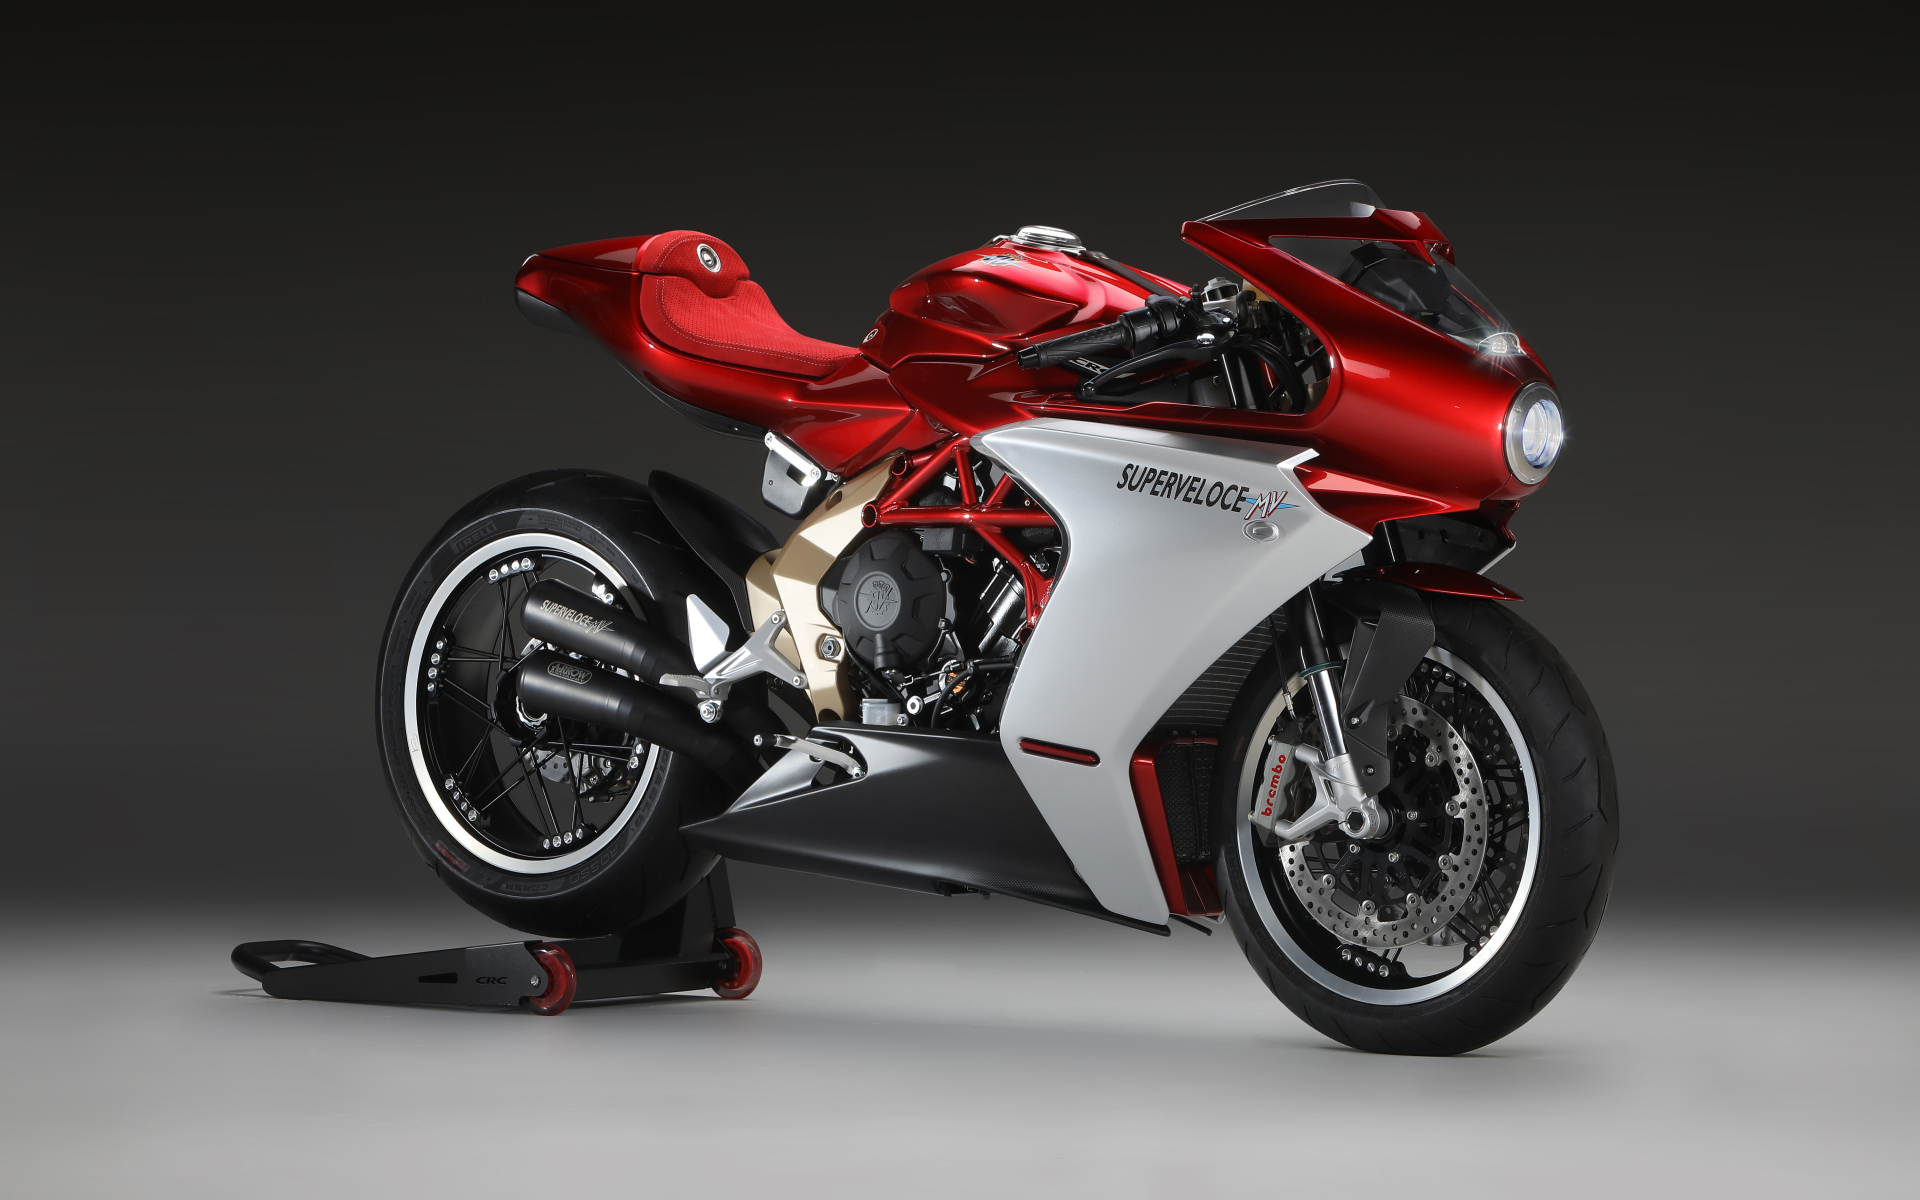 Red motorcycle Agusta Superveloce 800 Serie Oro 2020 on a gray background